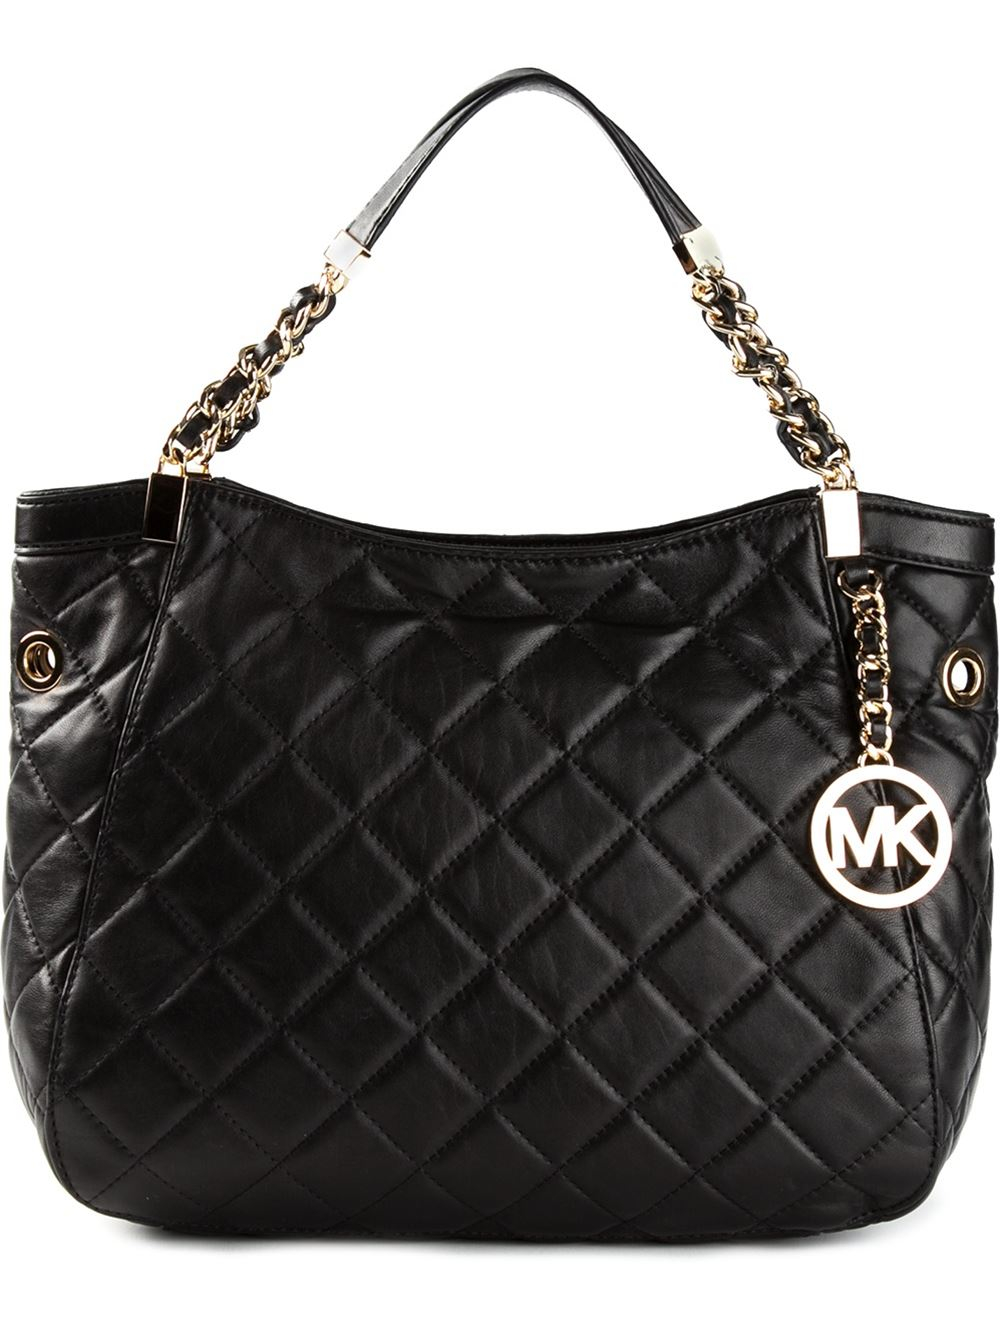 MICHAEL Michael Kors Susannah Quilted Tote in Black - Lyst